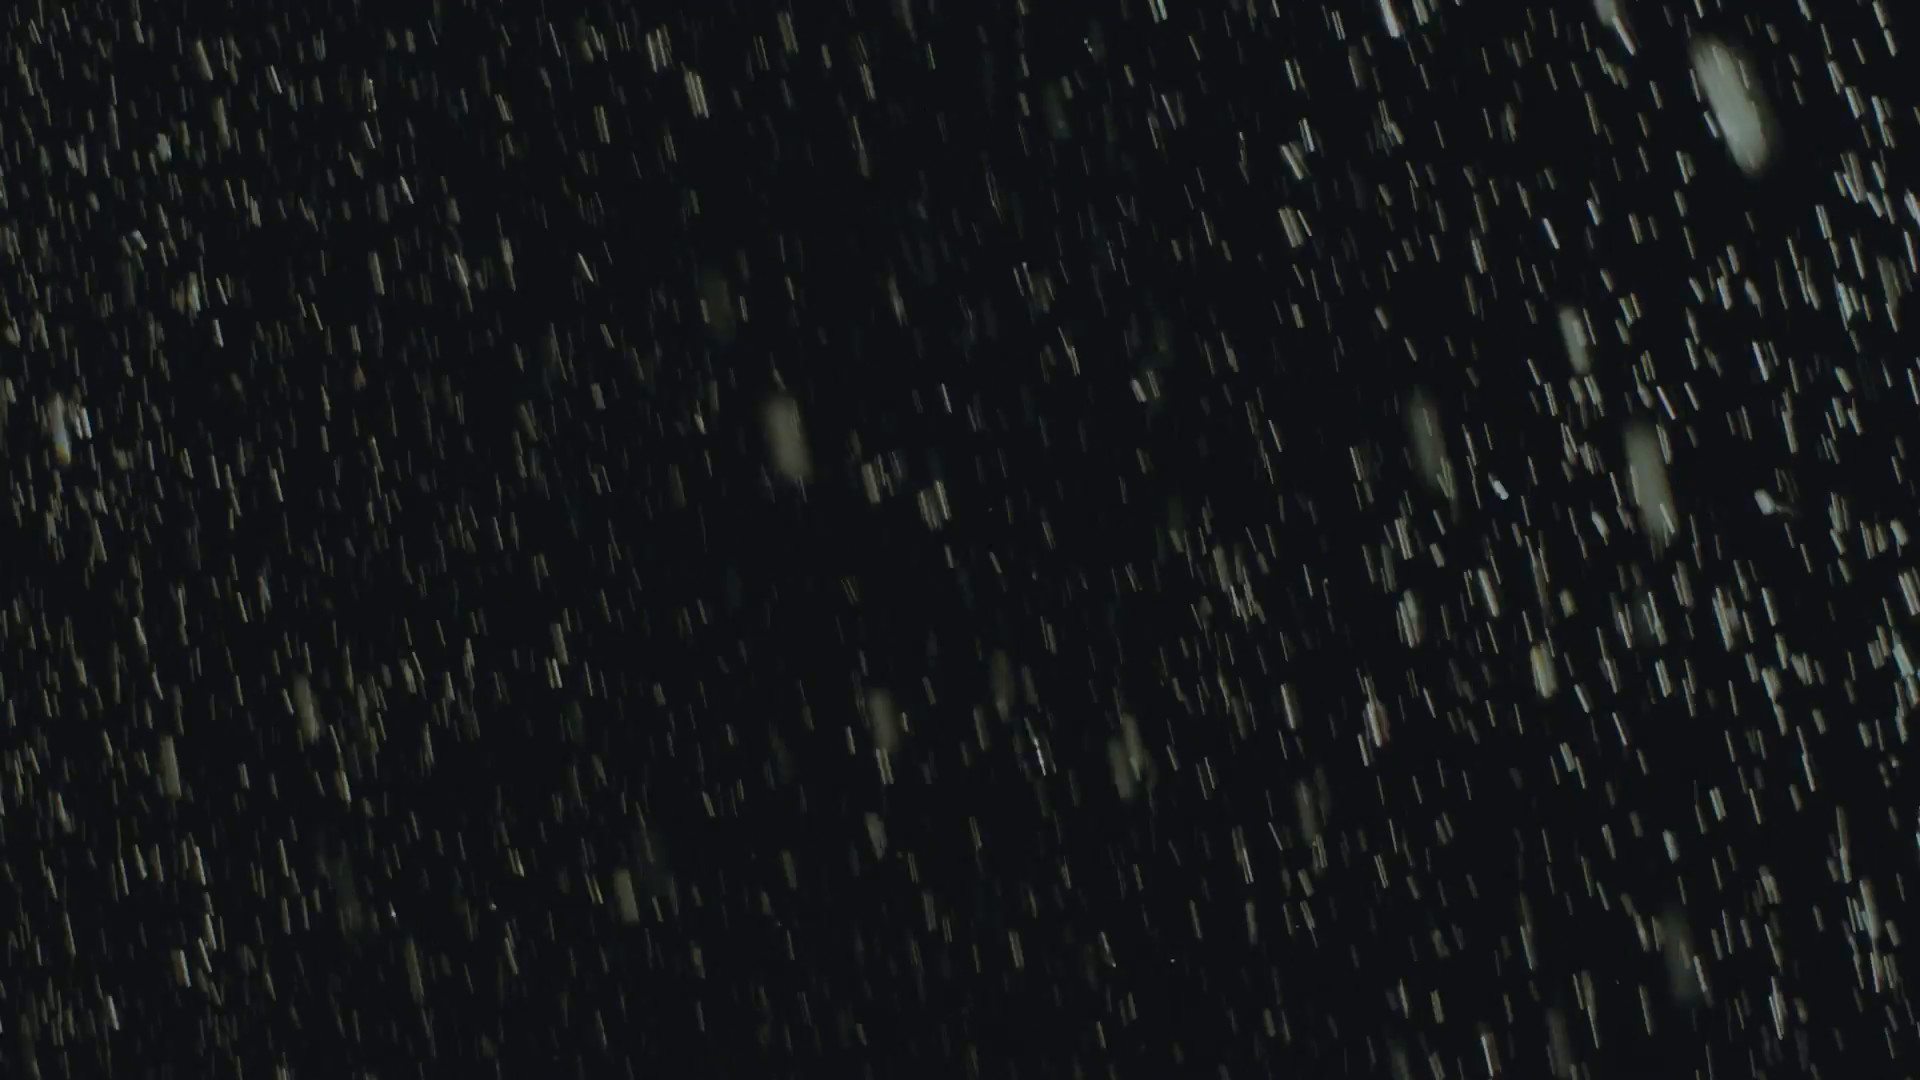 1920x1080 Rain drops falling on black, background, backlit,200fps,loopable.HD16:9  background of heavy hard rain falling in 200p slow motion conformed to 25p.